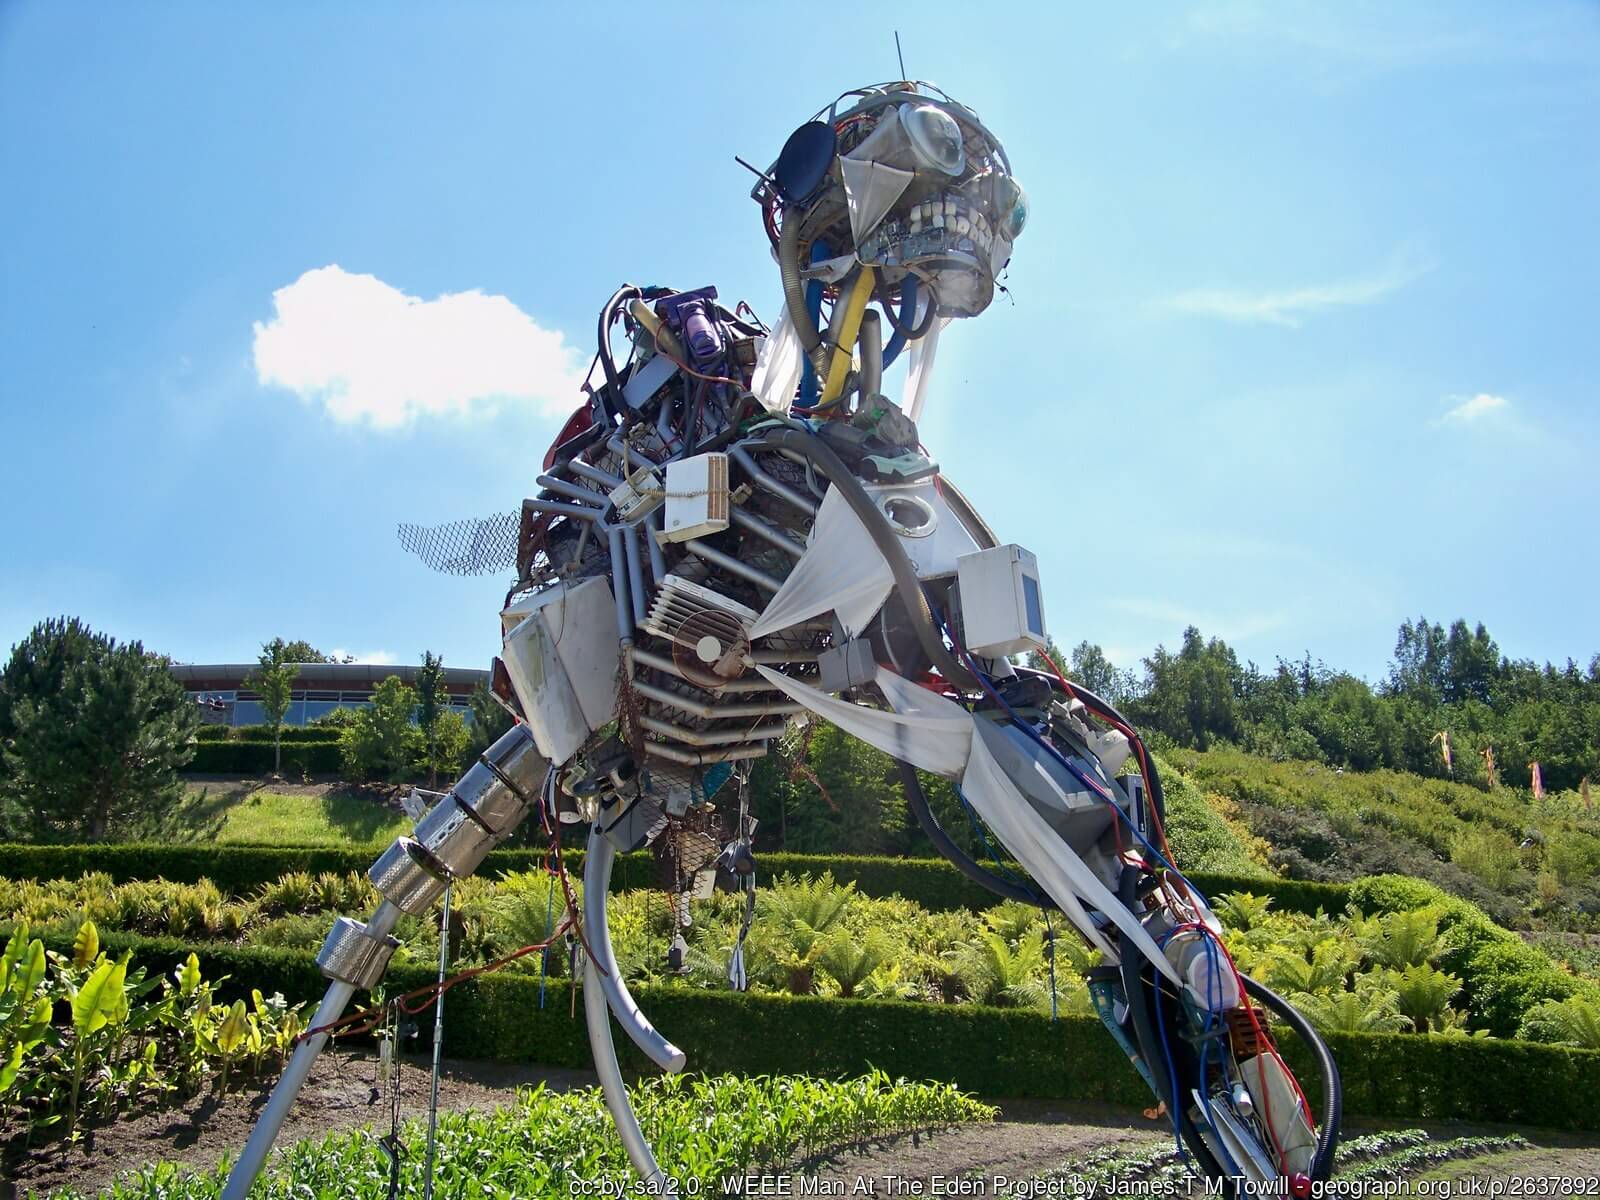 Image of &quot;WEEE Man&quot; statue, which is made from 3.3 metric tons of electrical waste, or the average amount of e-waste that one UK individual creates in a lifetime. (Photograph by James T.M. Towill and <a href="https://www.geograph.org.uk/photo/2637892">published</a> under a <a href="https://spdx.org/licenses/CC-BY-SA-2.0.html">CC-BY-SA-2.0</a> license.)